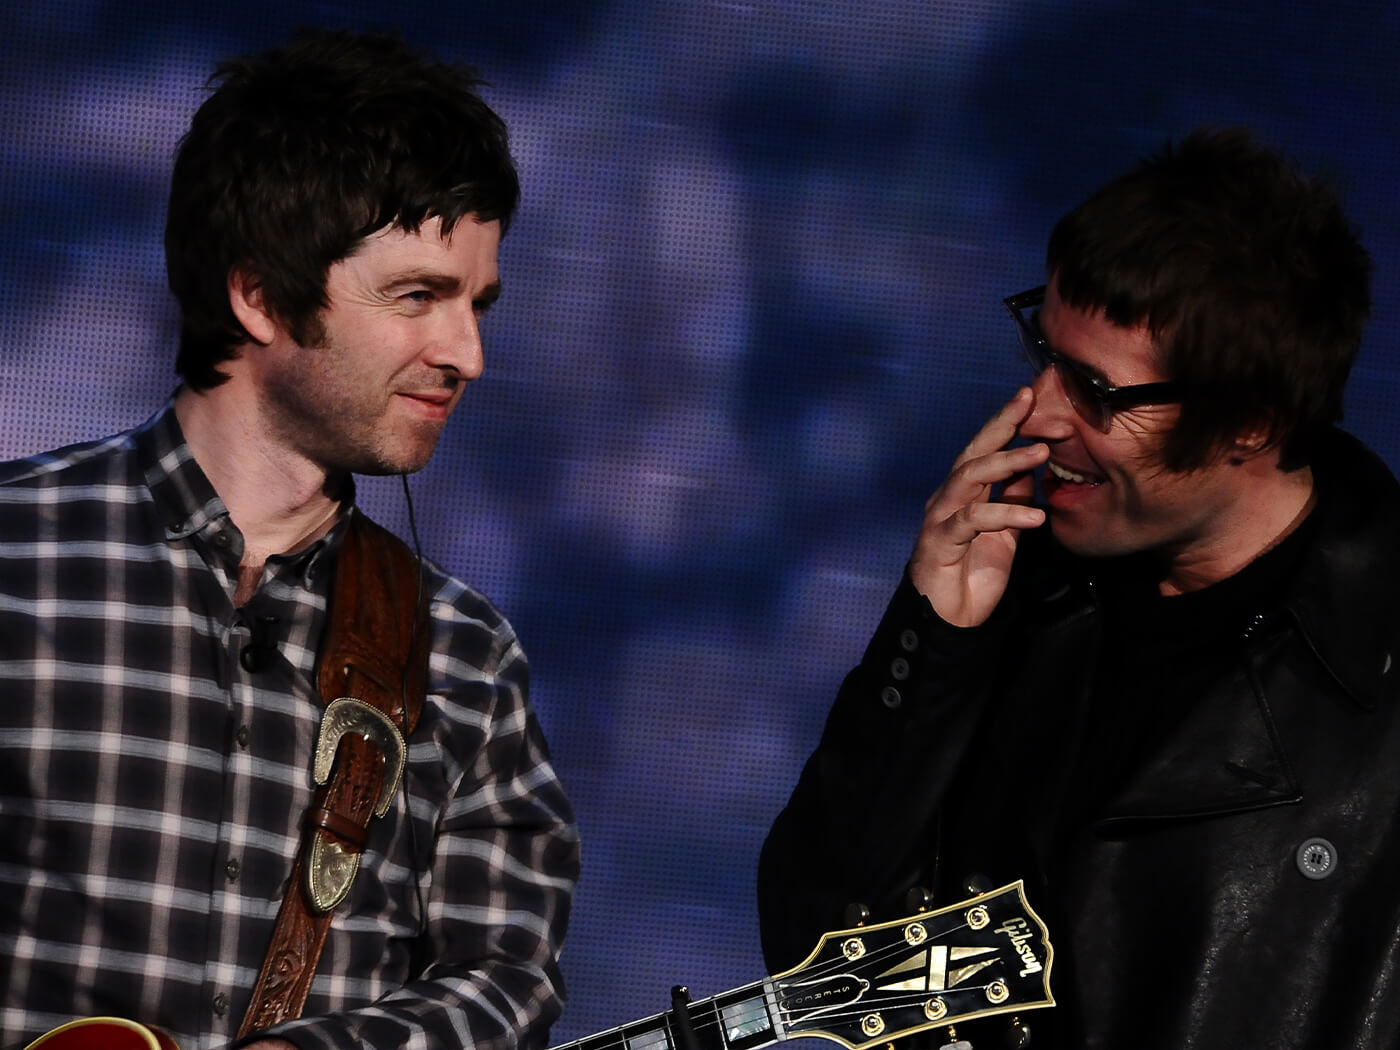 Noel and Liam Gallagher onstage